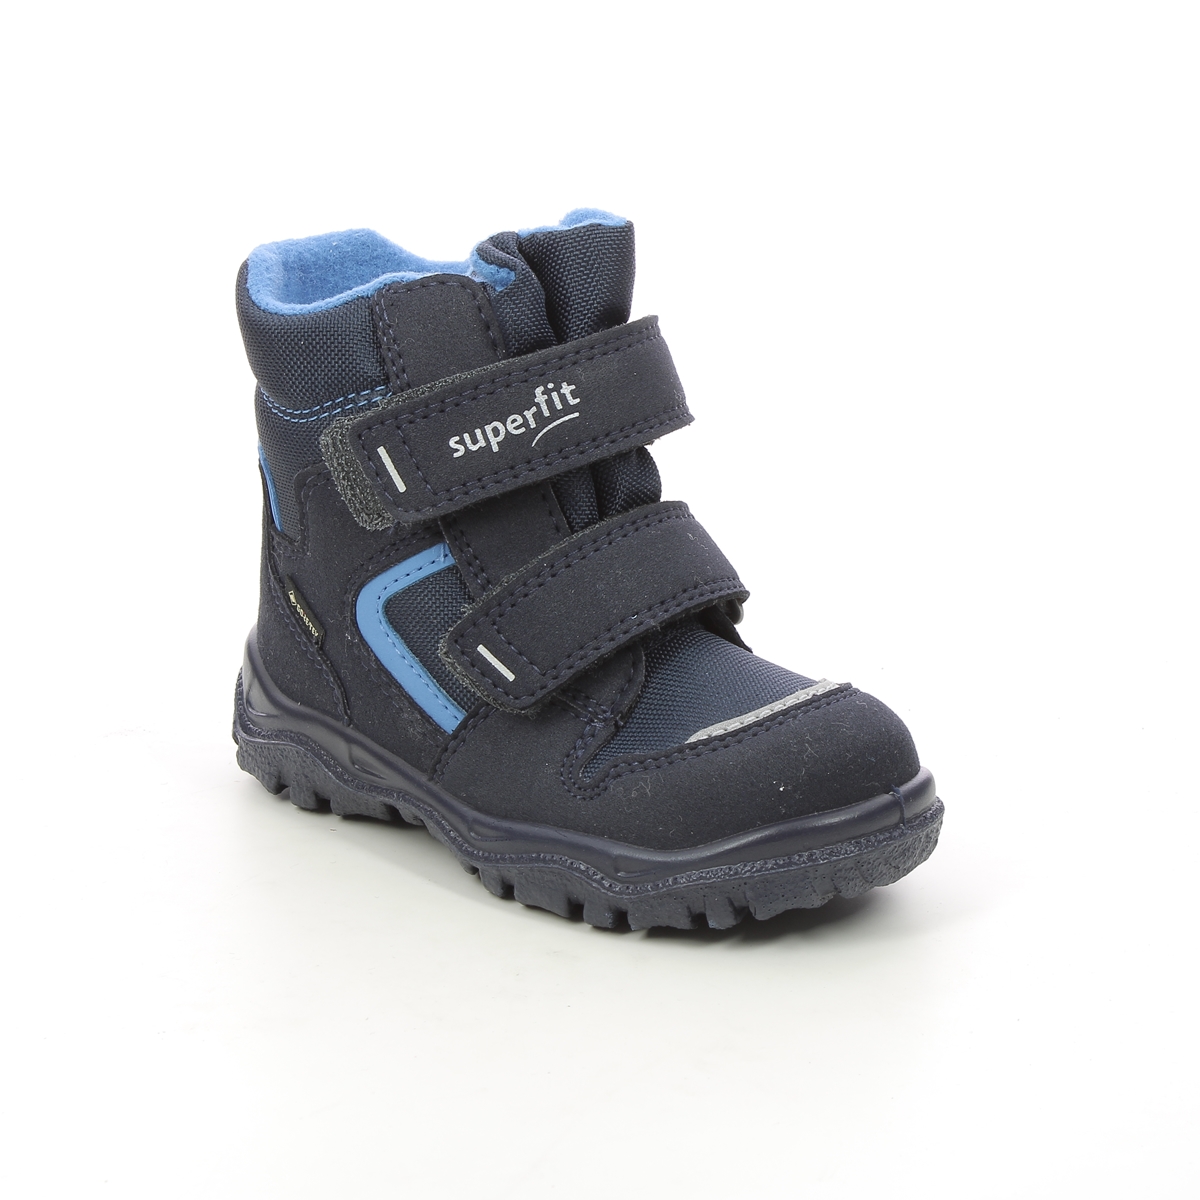 Superfit Husky Inf Gtx Navy Kids Toddler Boys Boots 1000047-8000 In Size 25 In Plain Navy